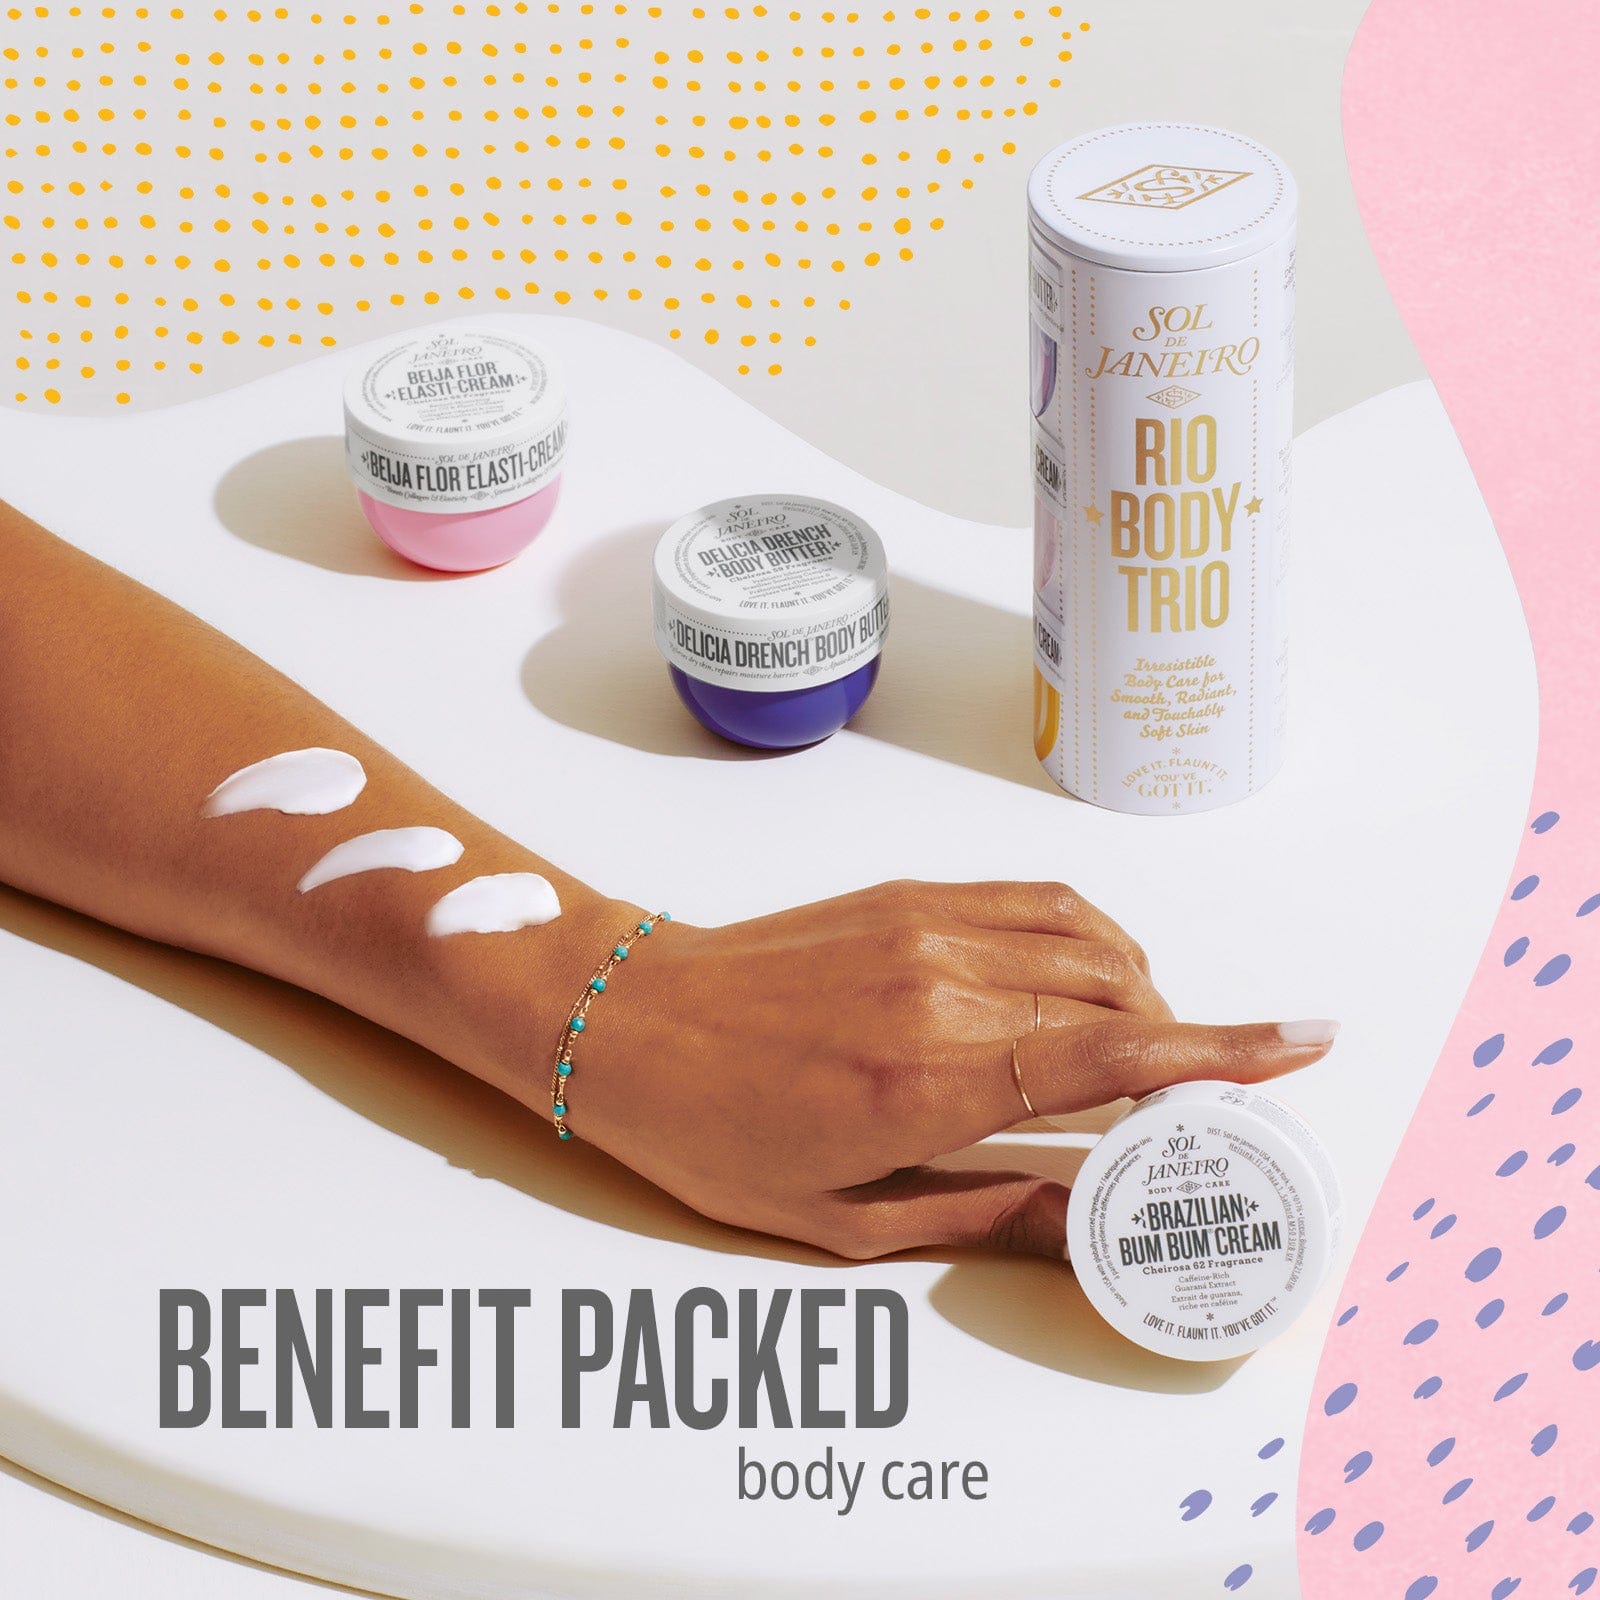 Benefit Packed Body Care